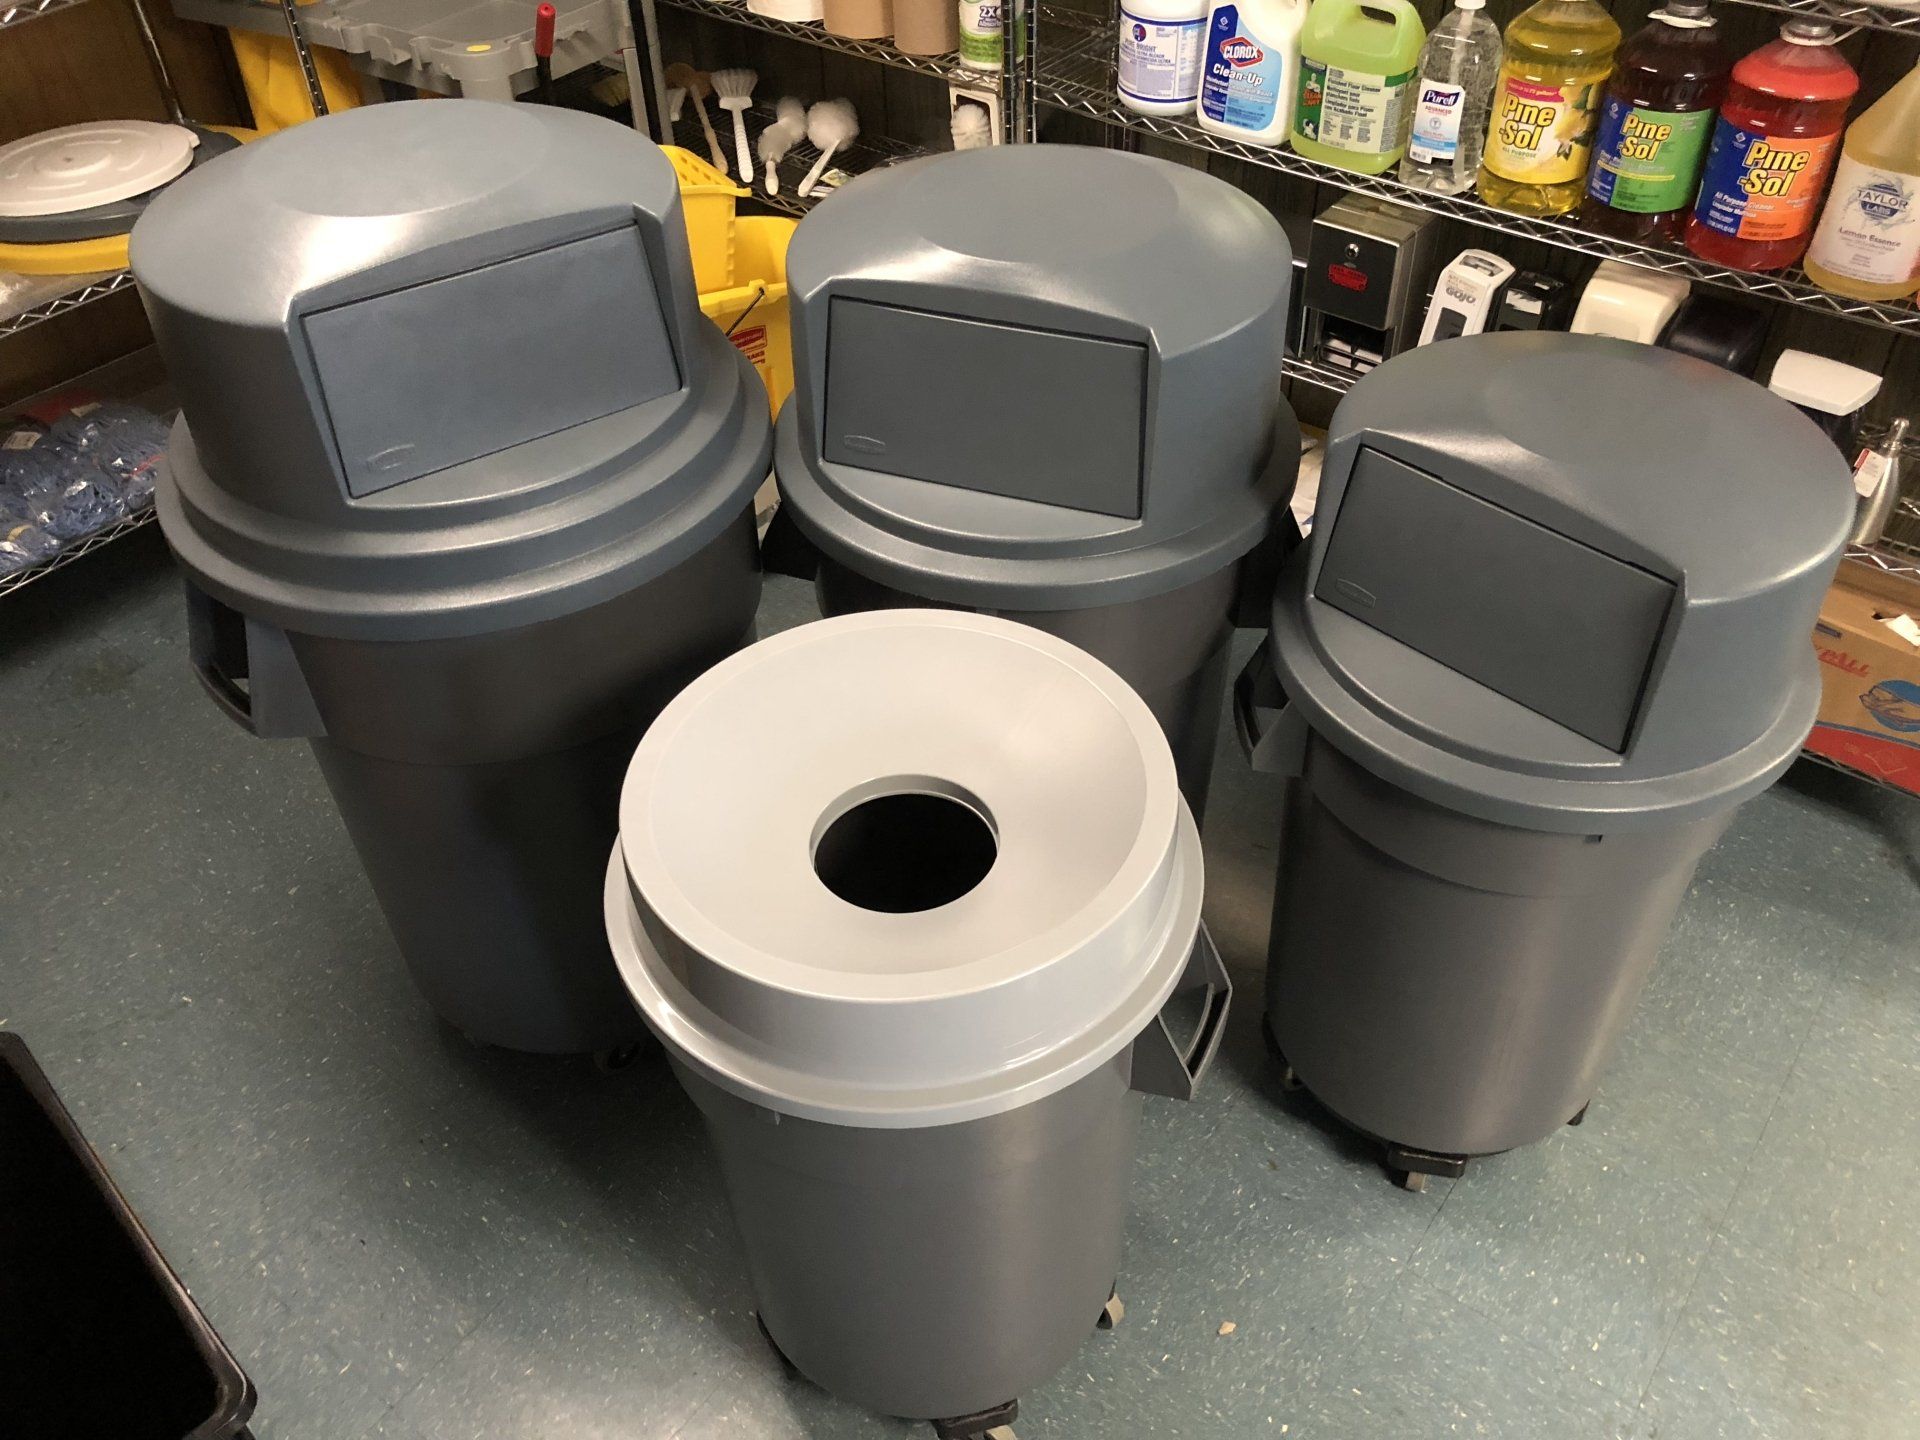 A group of trash cans are sitting on the floor in a room.